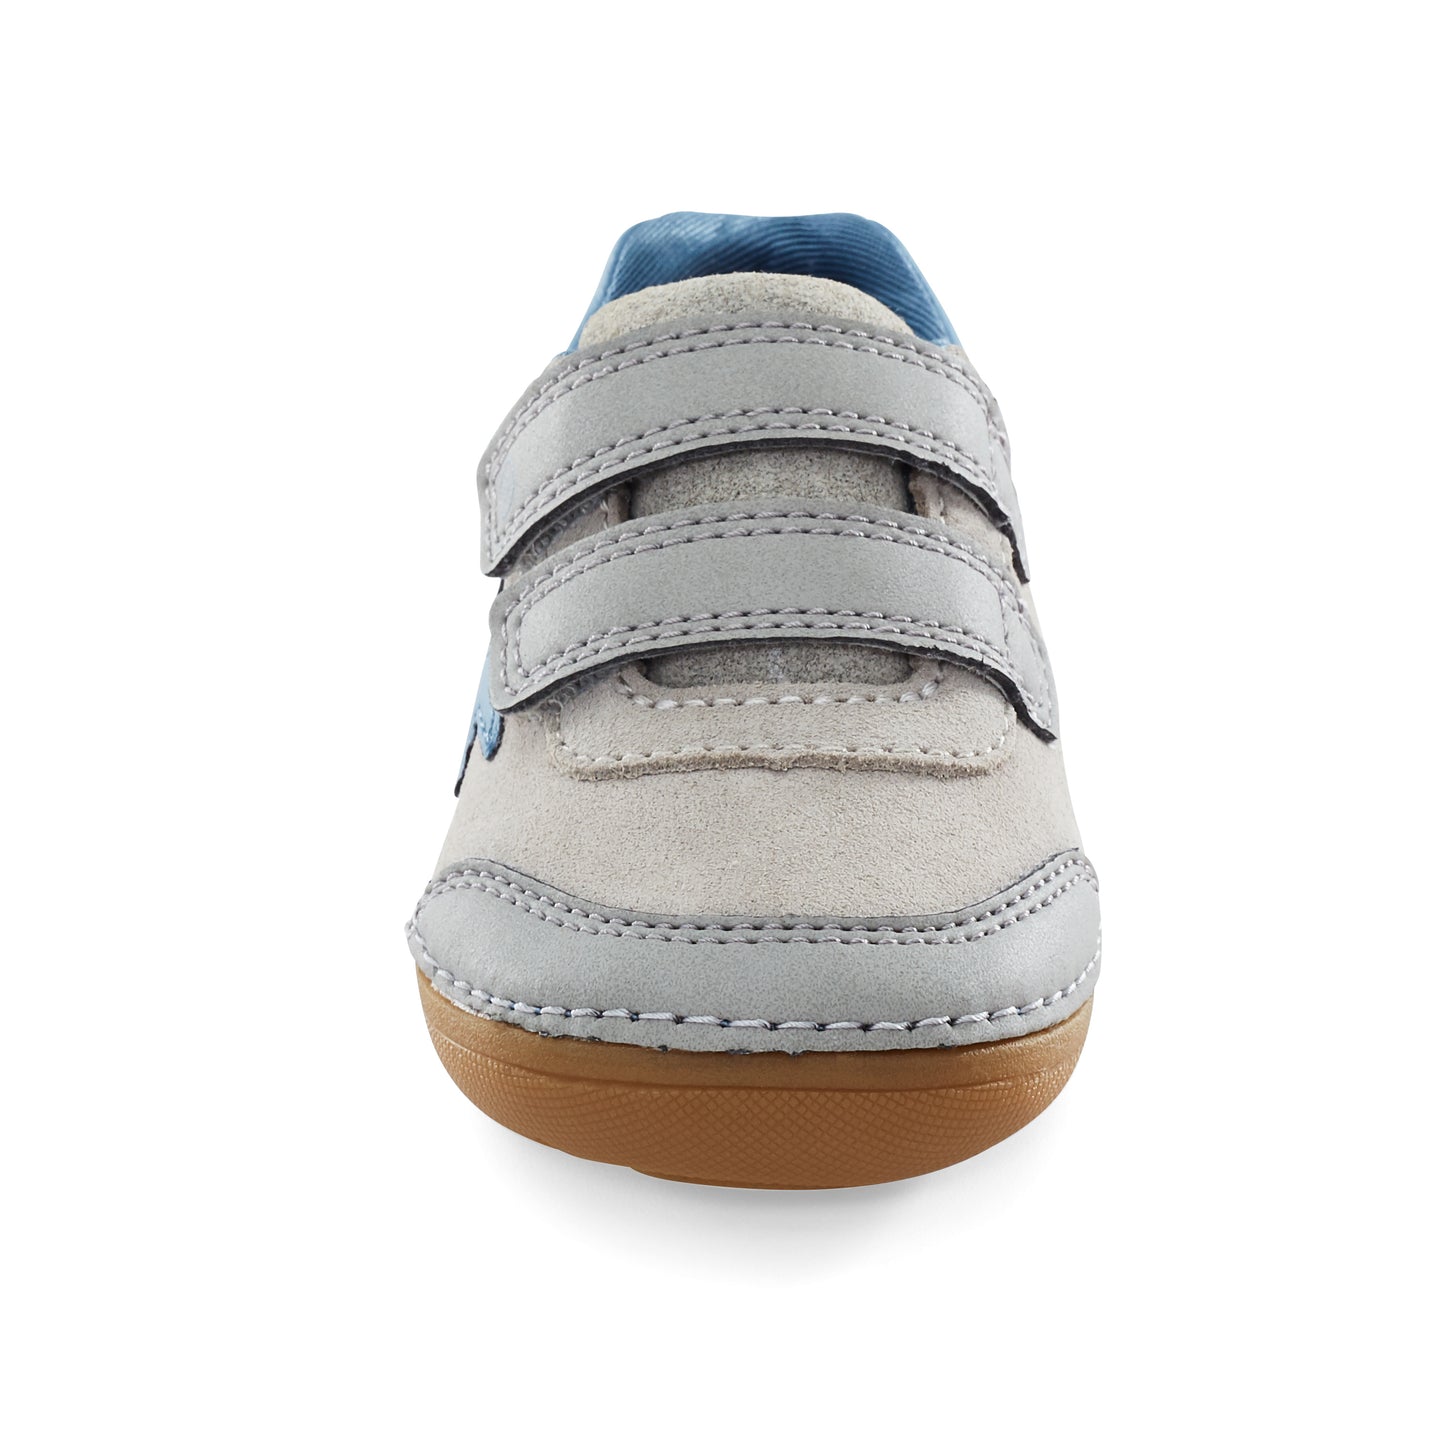 soft-motion-zips-kennedy-sneaker-littlekid-taupe-blue__Taupe/Blue_5